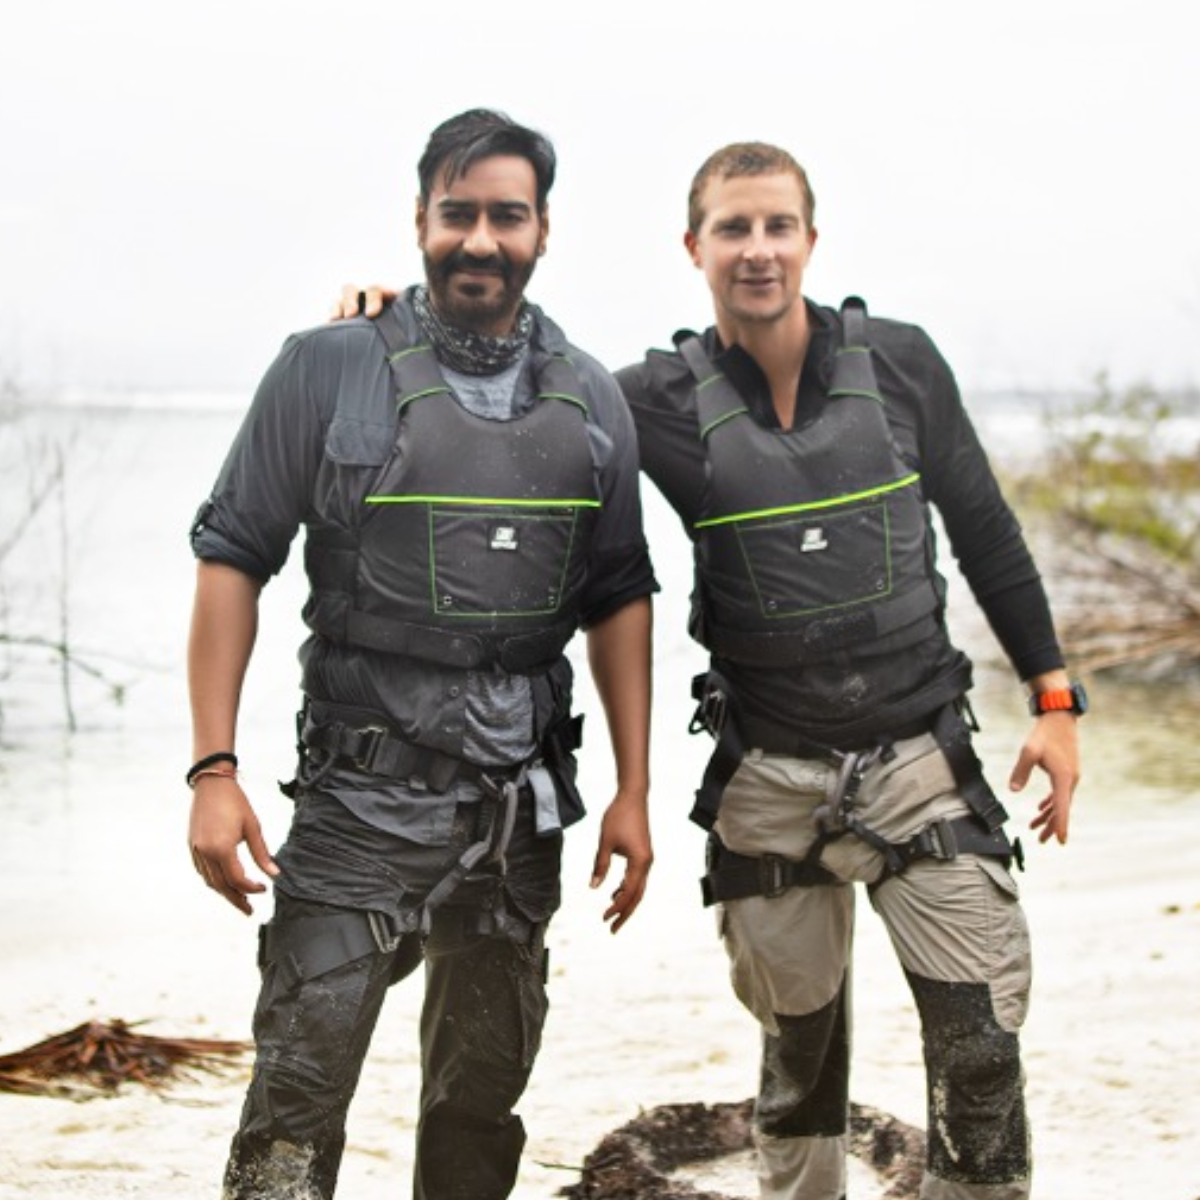 Into The Wild with Bear Grylls & Ajay Devgn Review: Singham star's sea survival adventure is 'buoyant'